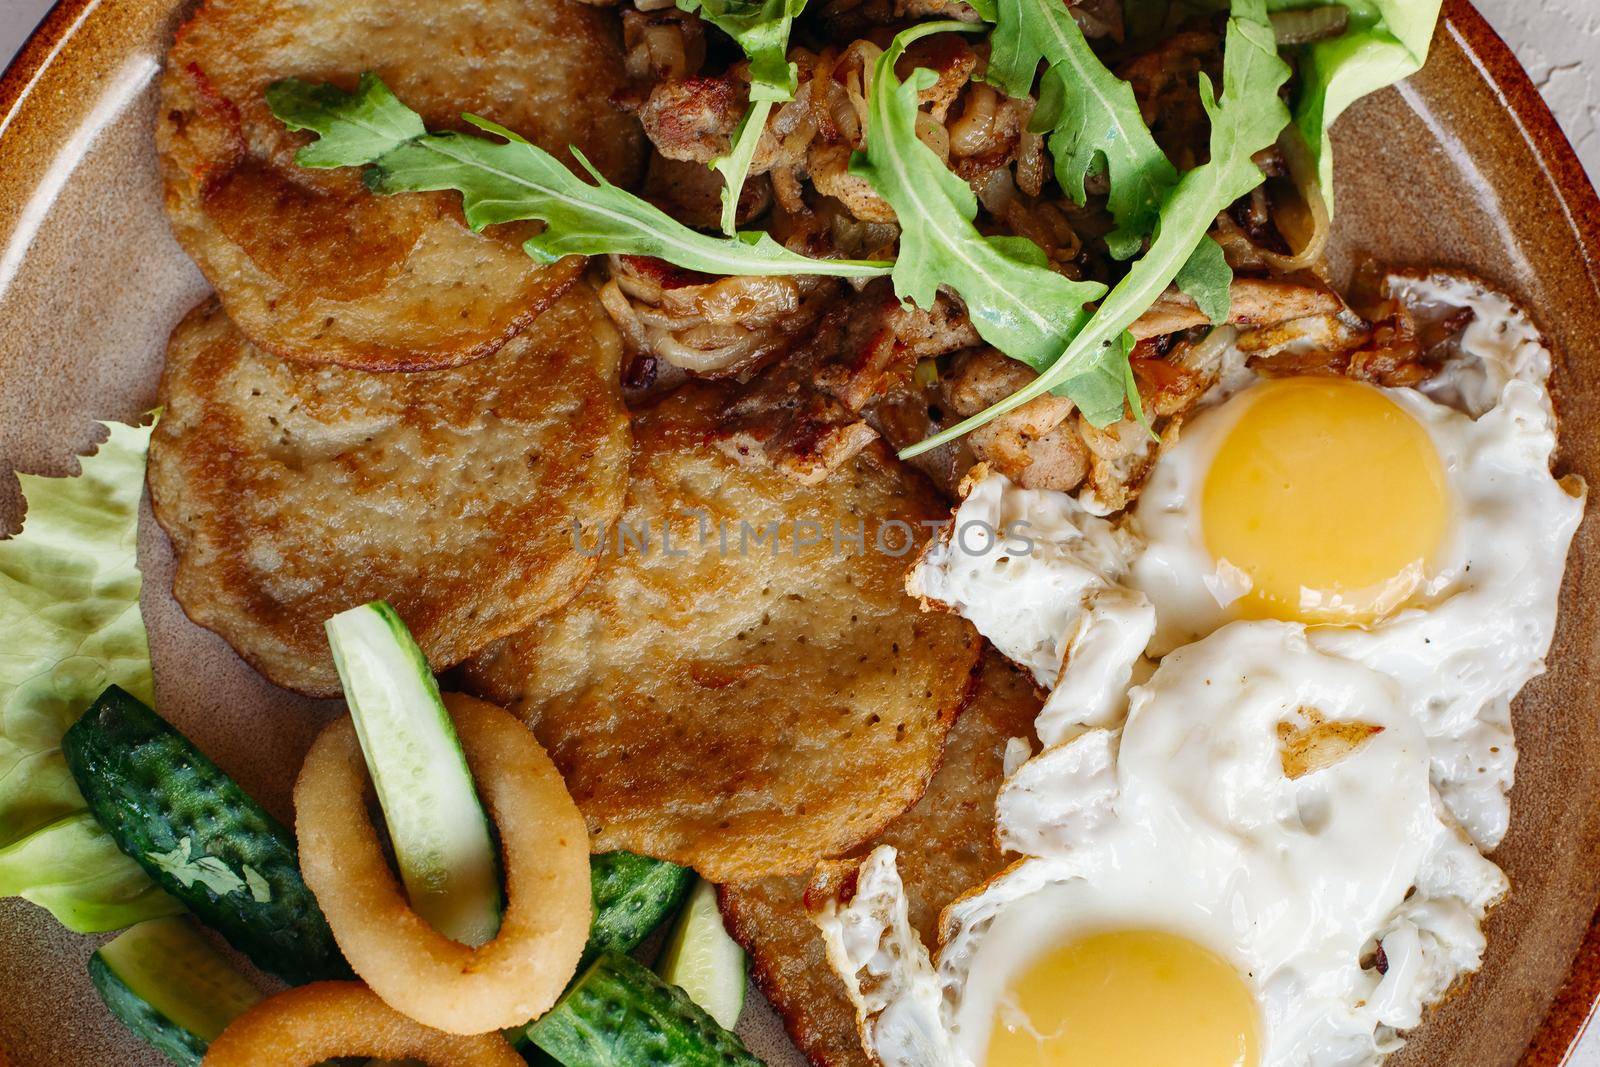 Delicious potato puncakes lying on brown clay plate with fried eggs. Fresh green cucumbers, fried golden onion and crusty meat, served with salad leaves. Tasty mouthwatering morning's meal.